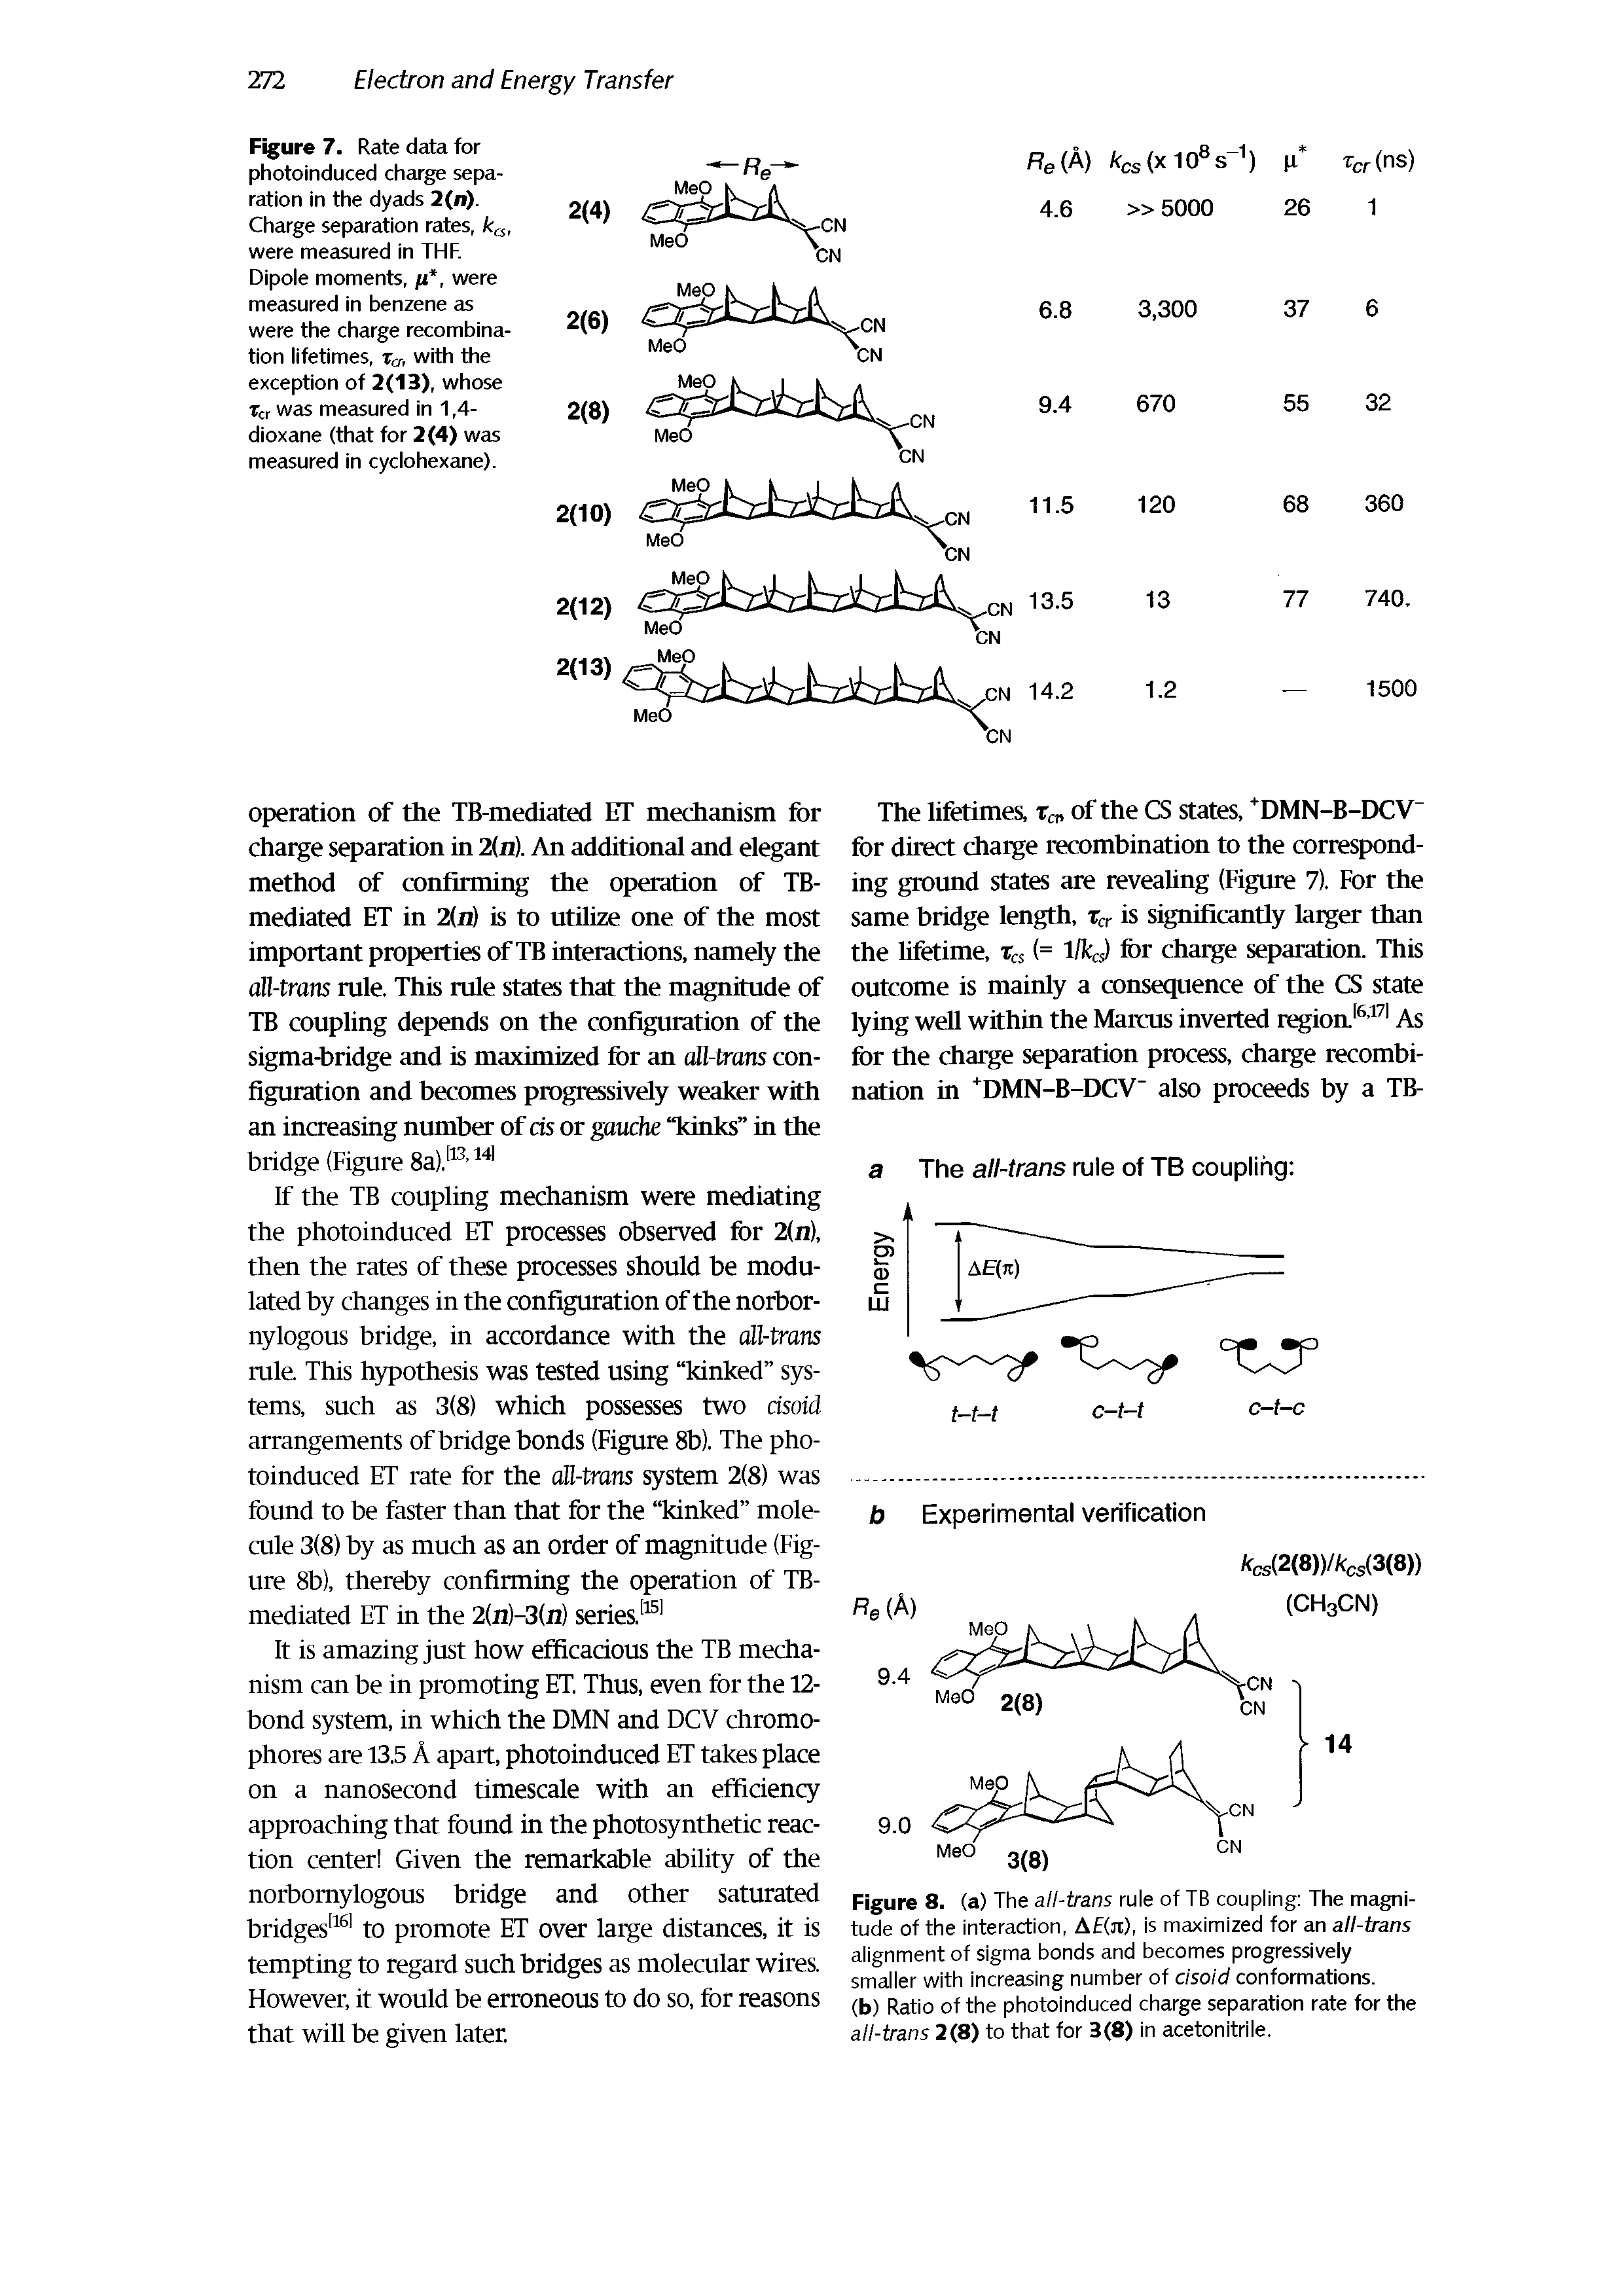 Figure 7. Rate data for photoinduced charge separation in the dyads 2(n). Charge separation rates, ka, were measured in THF. Dipole moments, n, were measured in benzene as were the charge recombination lifetimes, r,T, with the exception of 2(13), whose Tcr was measured in 1,4-dioxane (that for 2(4) was measured in cyclohexane).